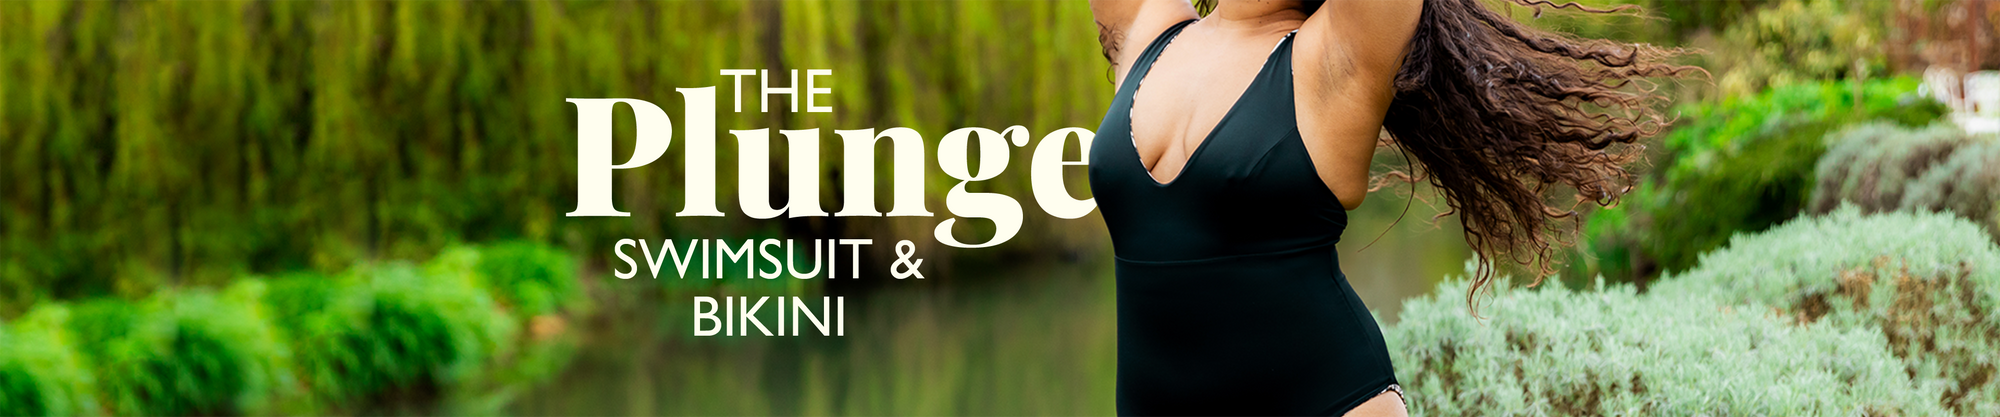 The Plunge Swimsuit